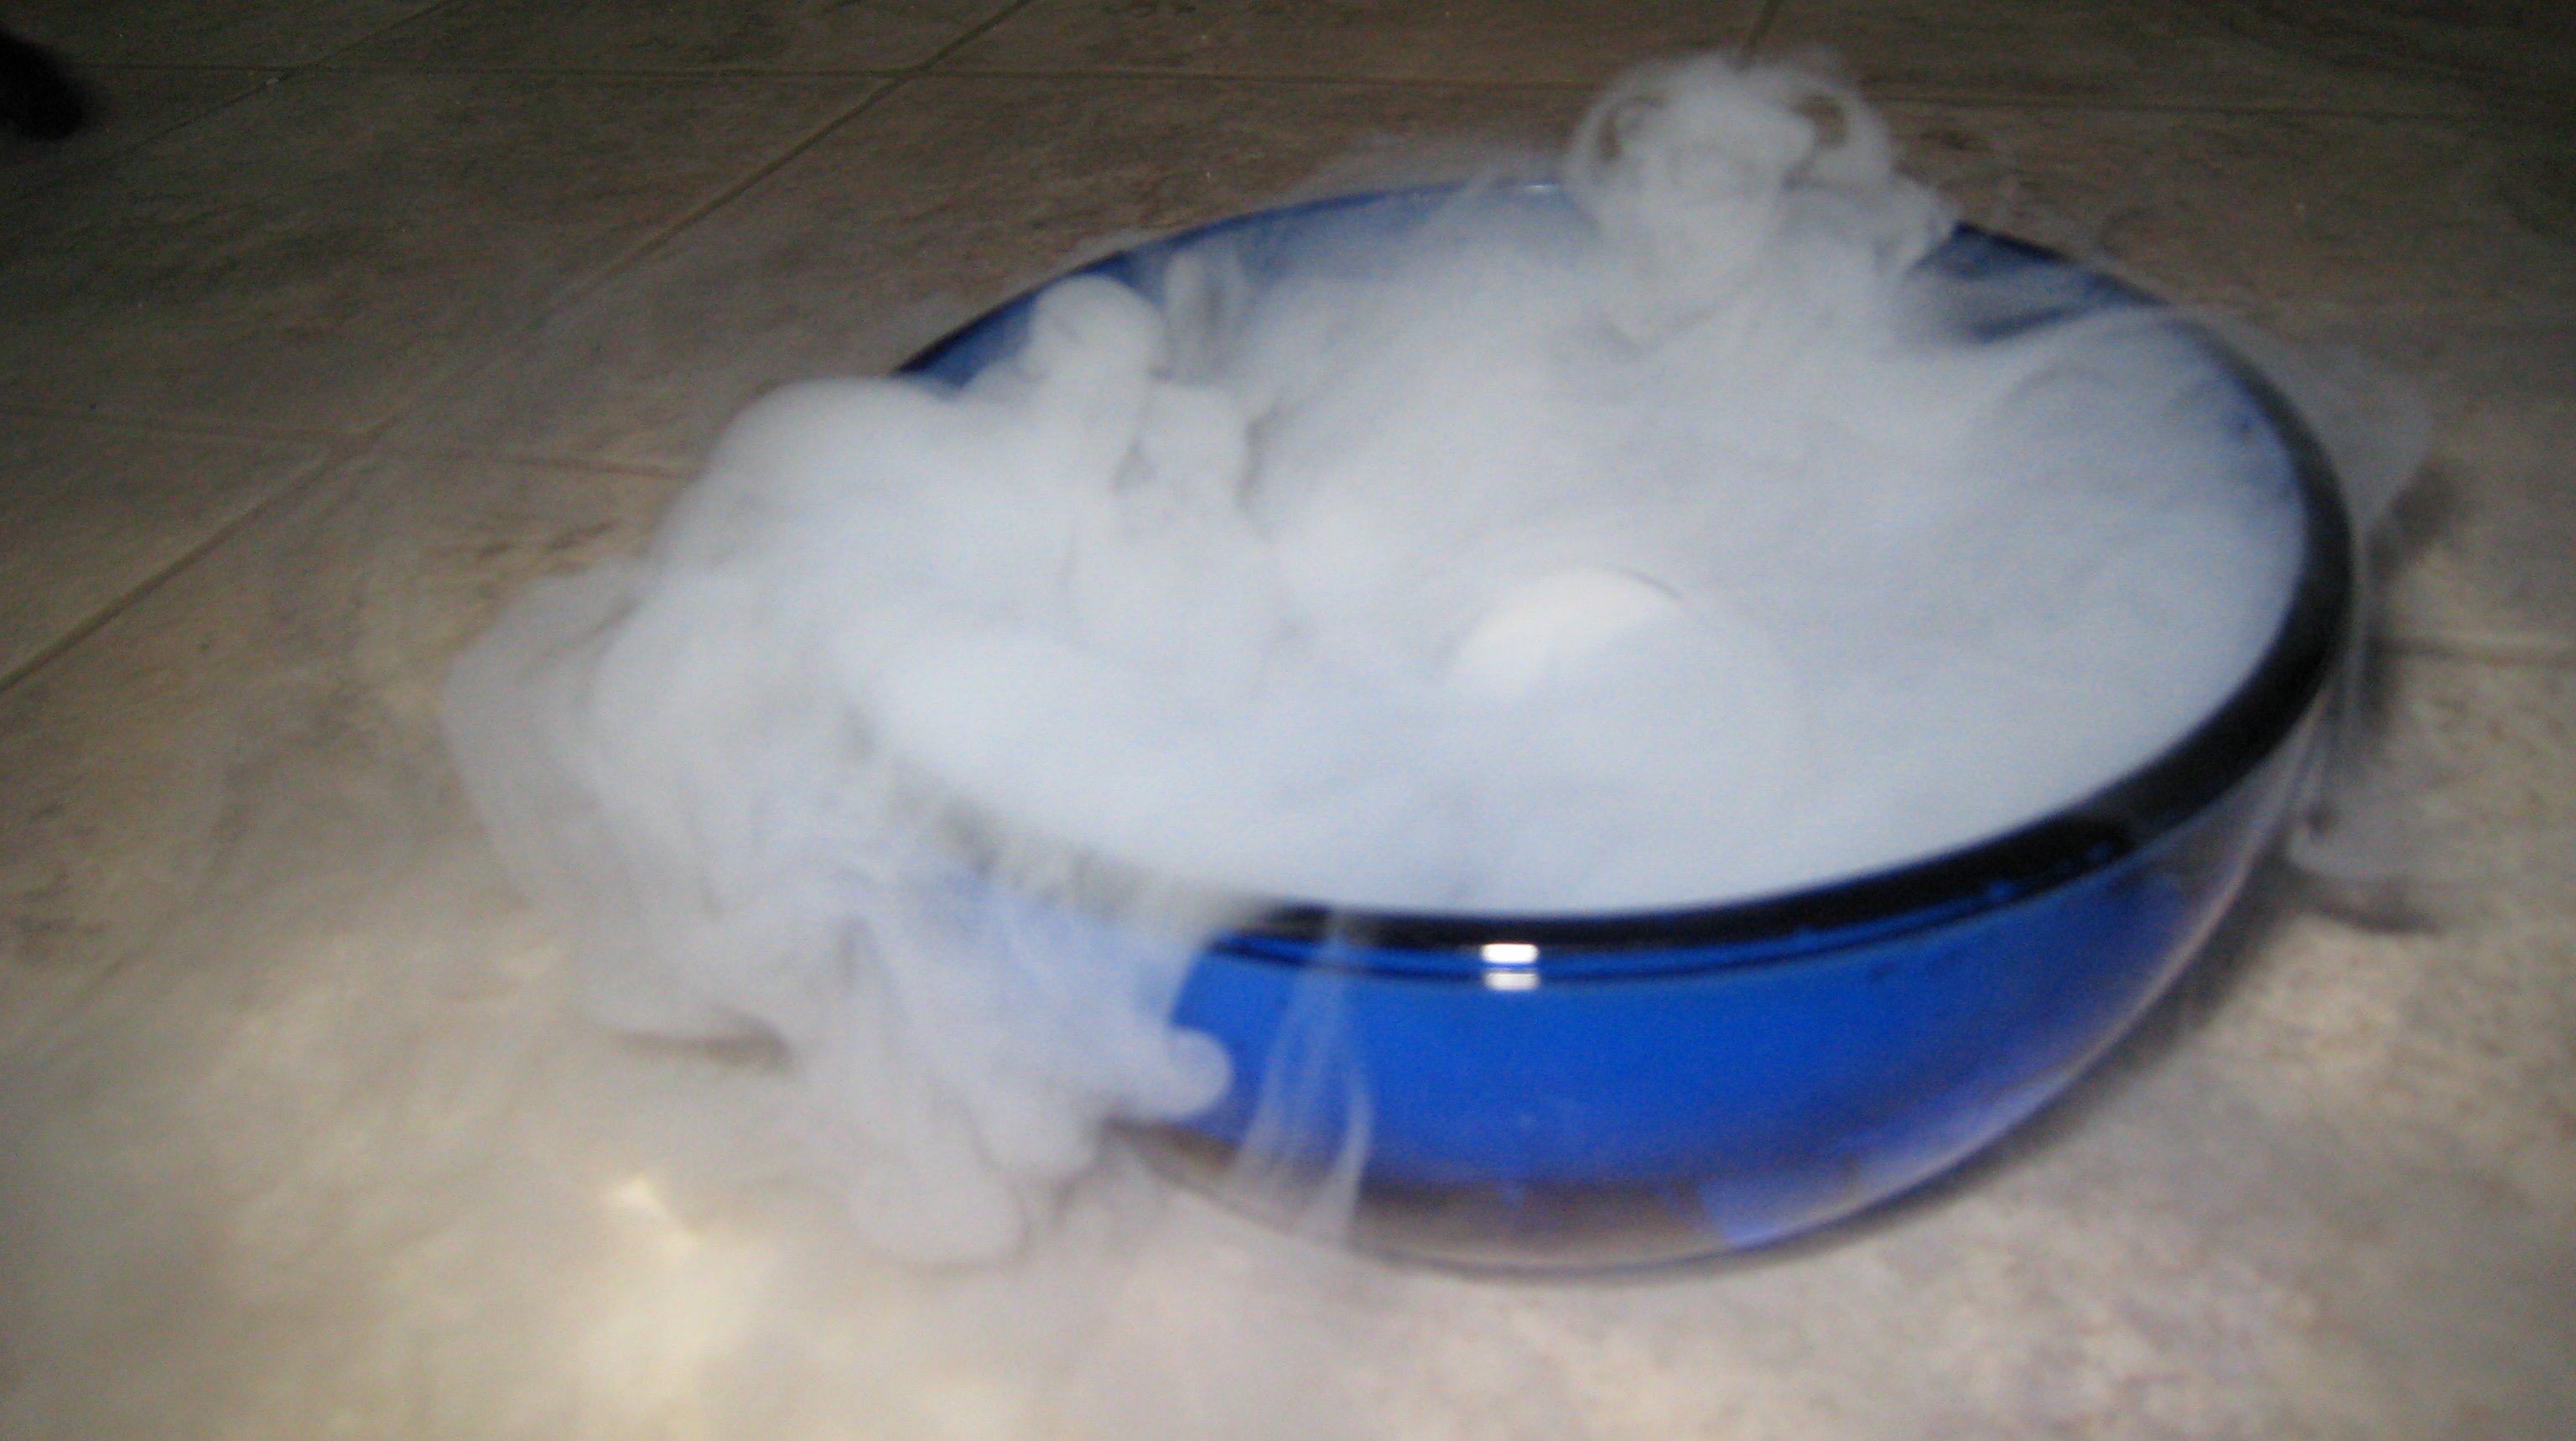 File:Dry Ice Sublimation 1.jpg - Wikimedia Commons